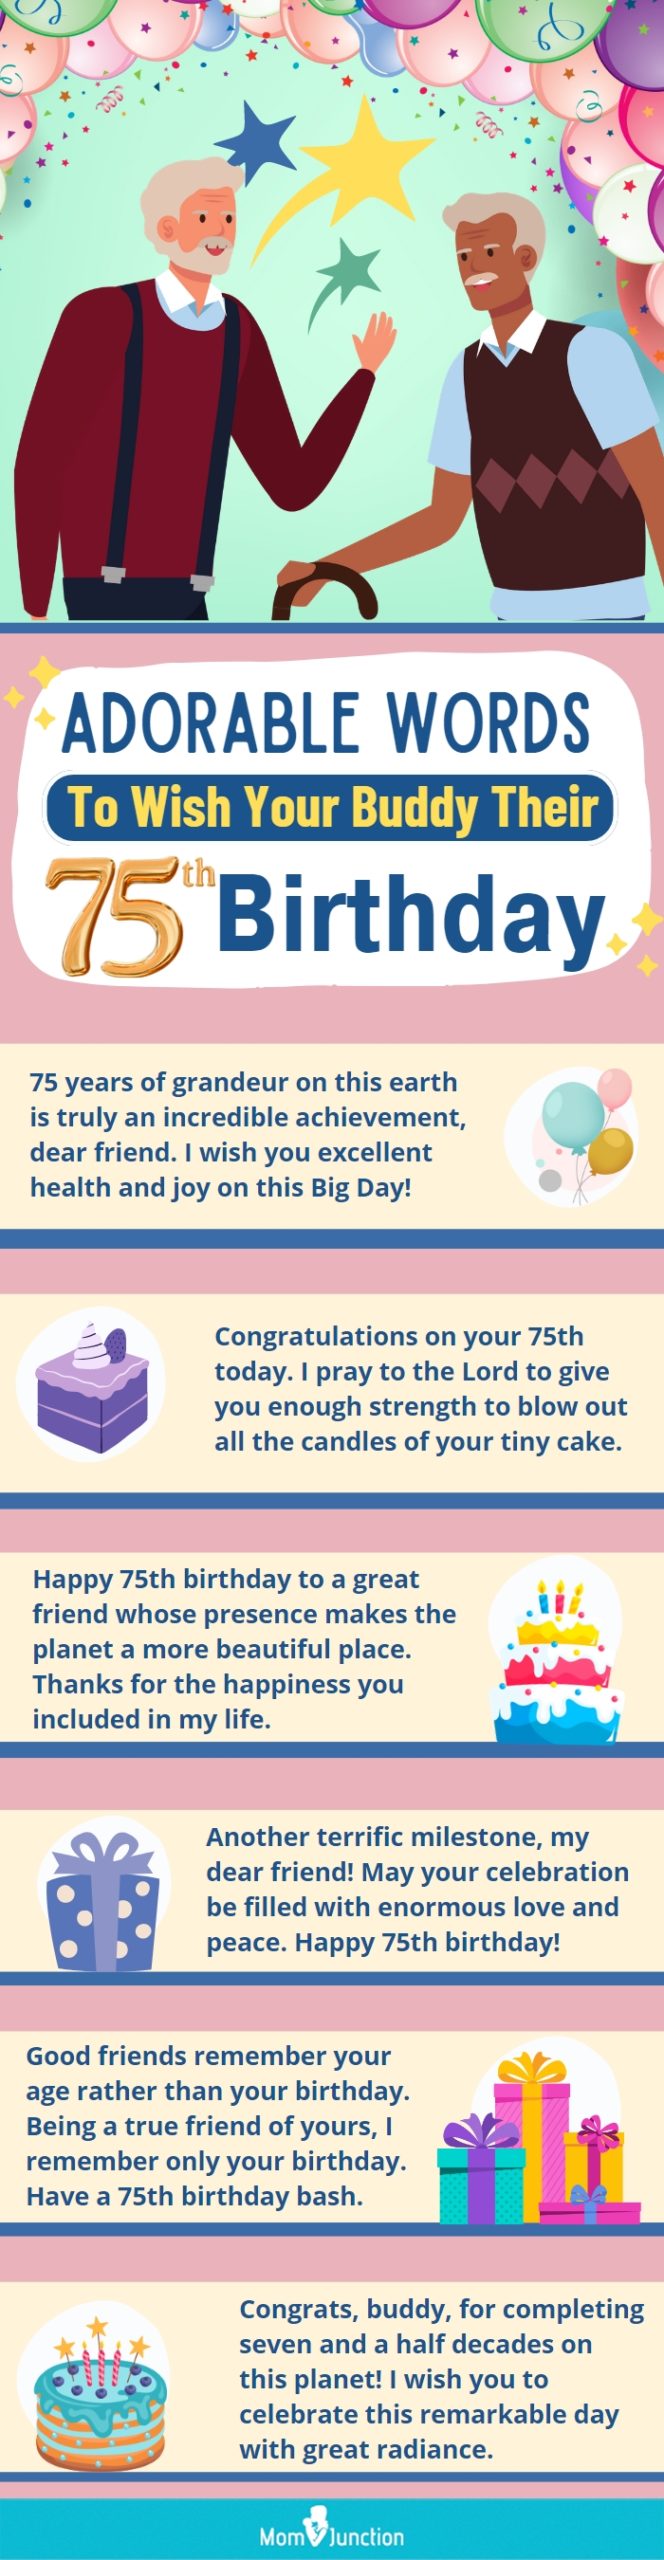 adorable words to wish your buddy their 75th birthday (infographic)